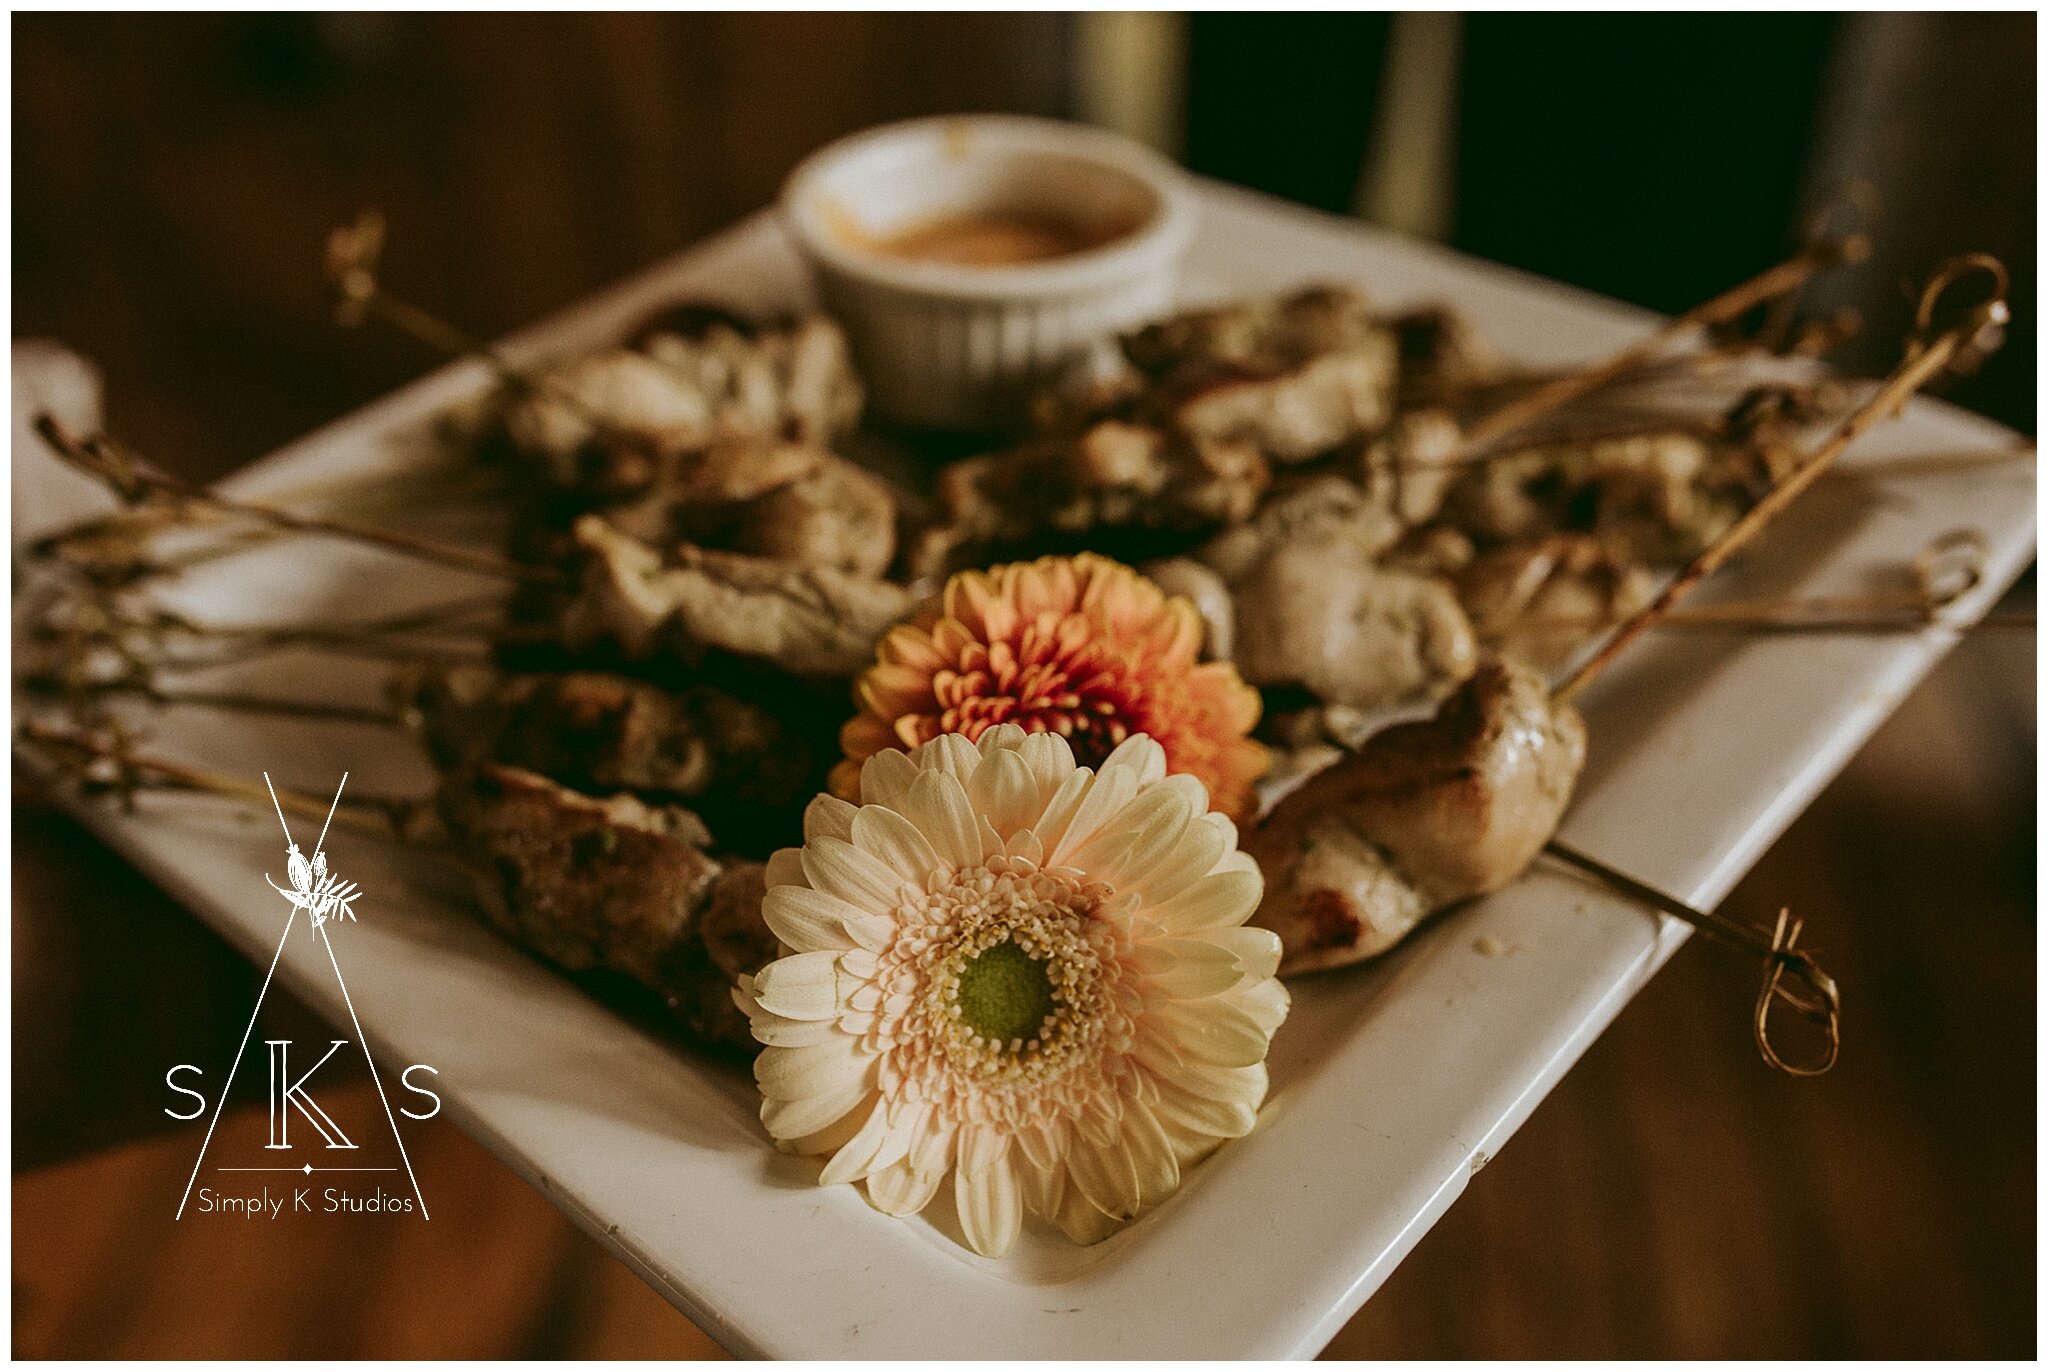  chicken skewers on a tray with a peach flower in front 